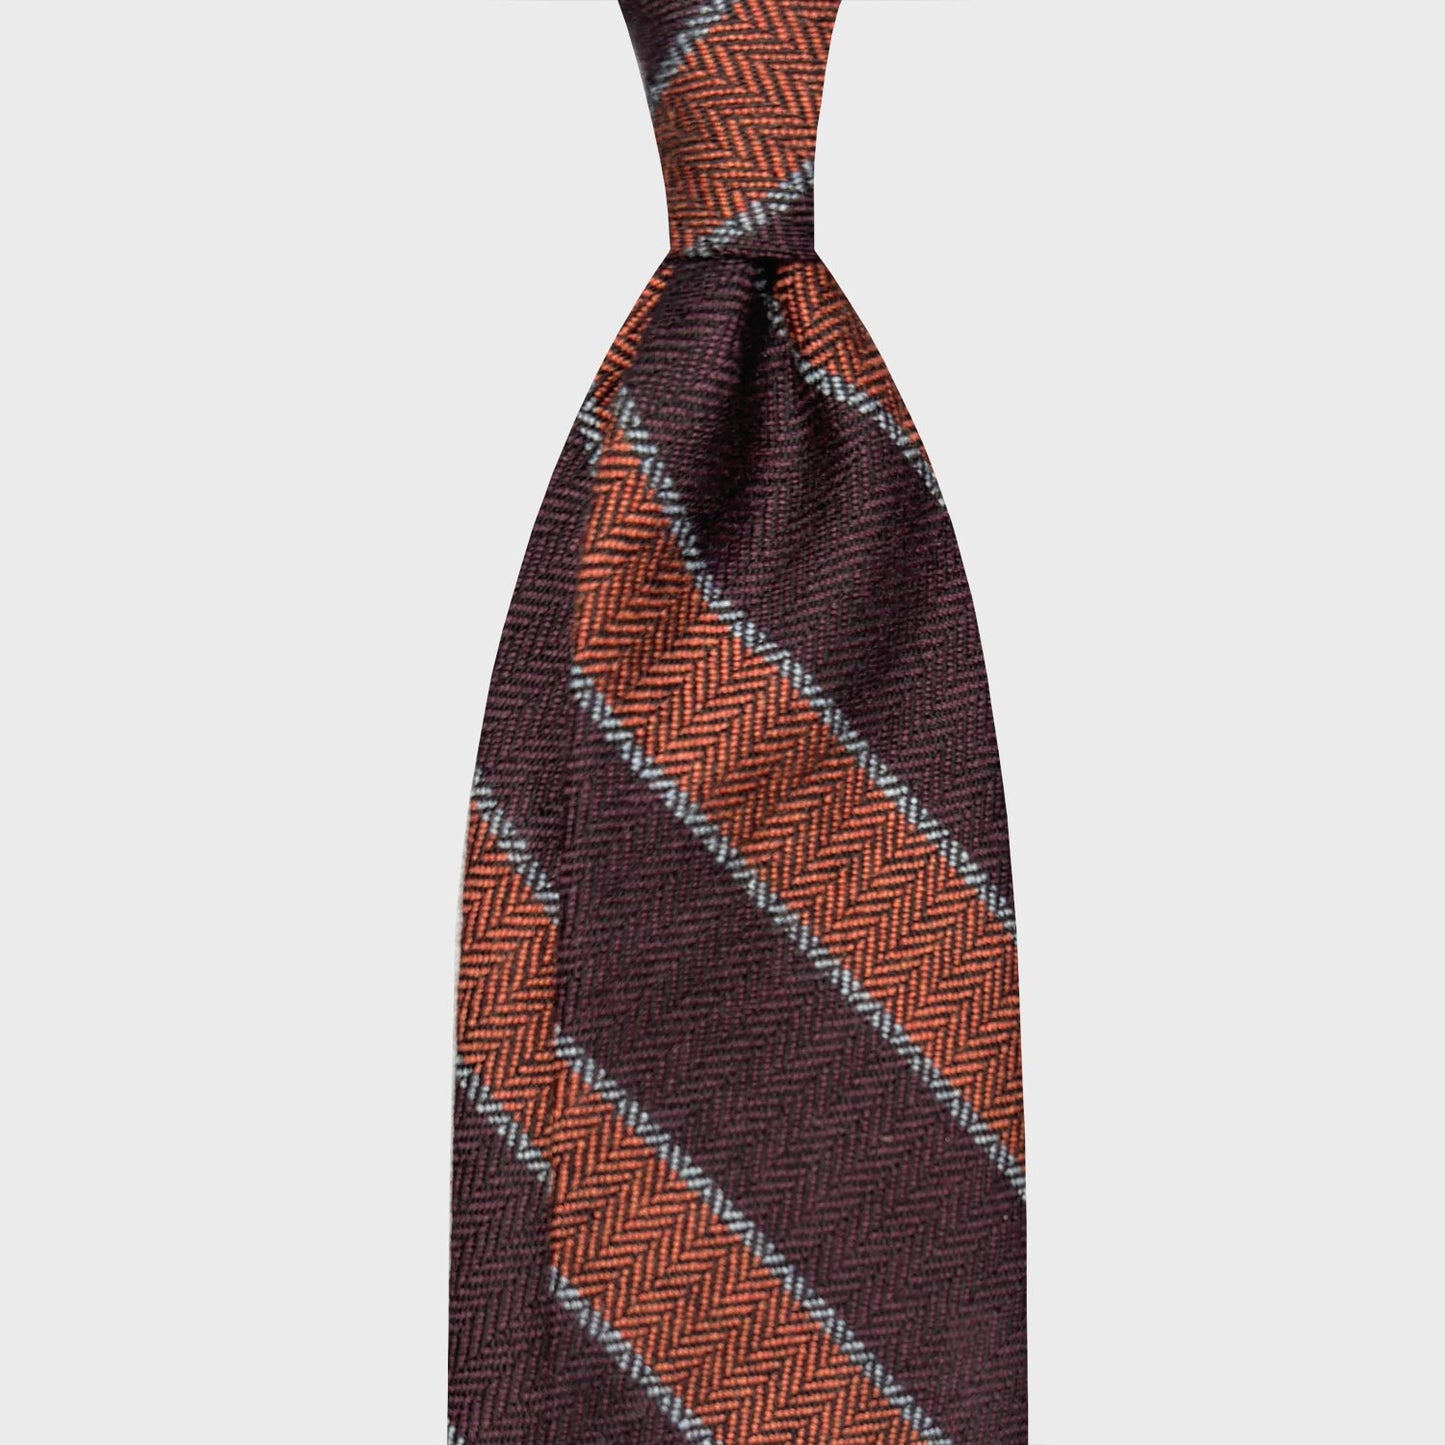 Purple Wine Striped Wool Tie. Regimental wool tie unlined and soft to the touch, striped purple wine and orange, F.Marino Napoli exclusive handmade striped tie for Wools Boutique Uomo 